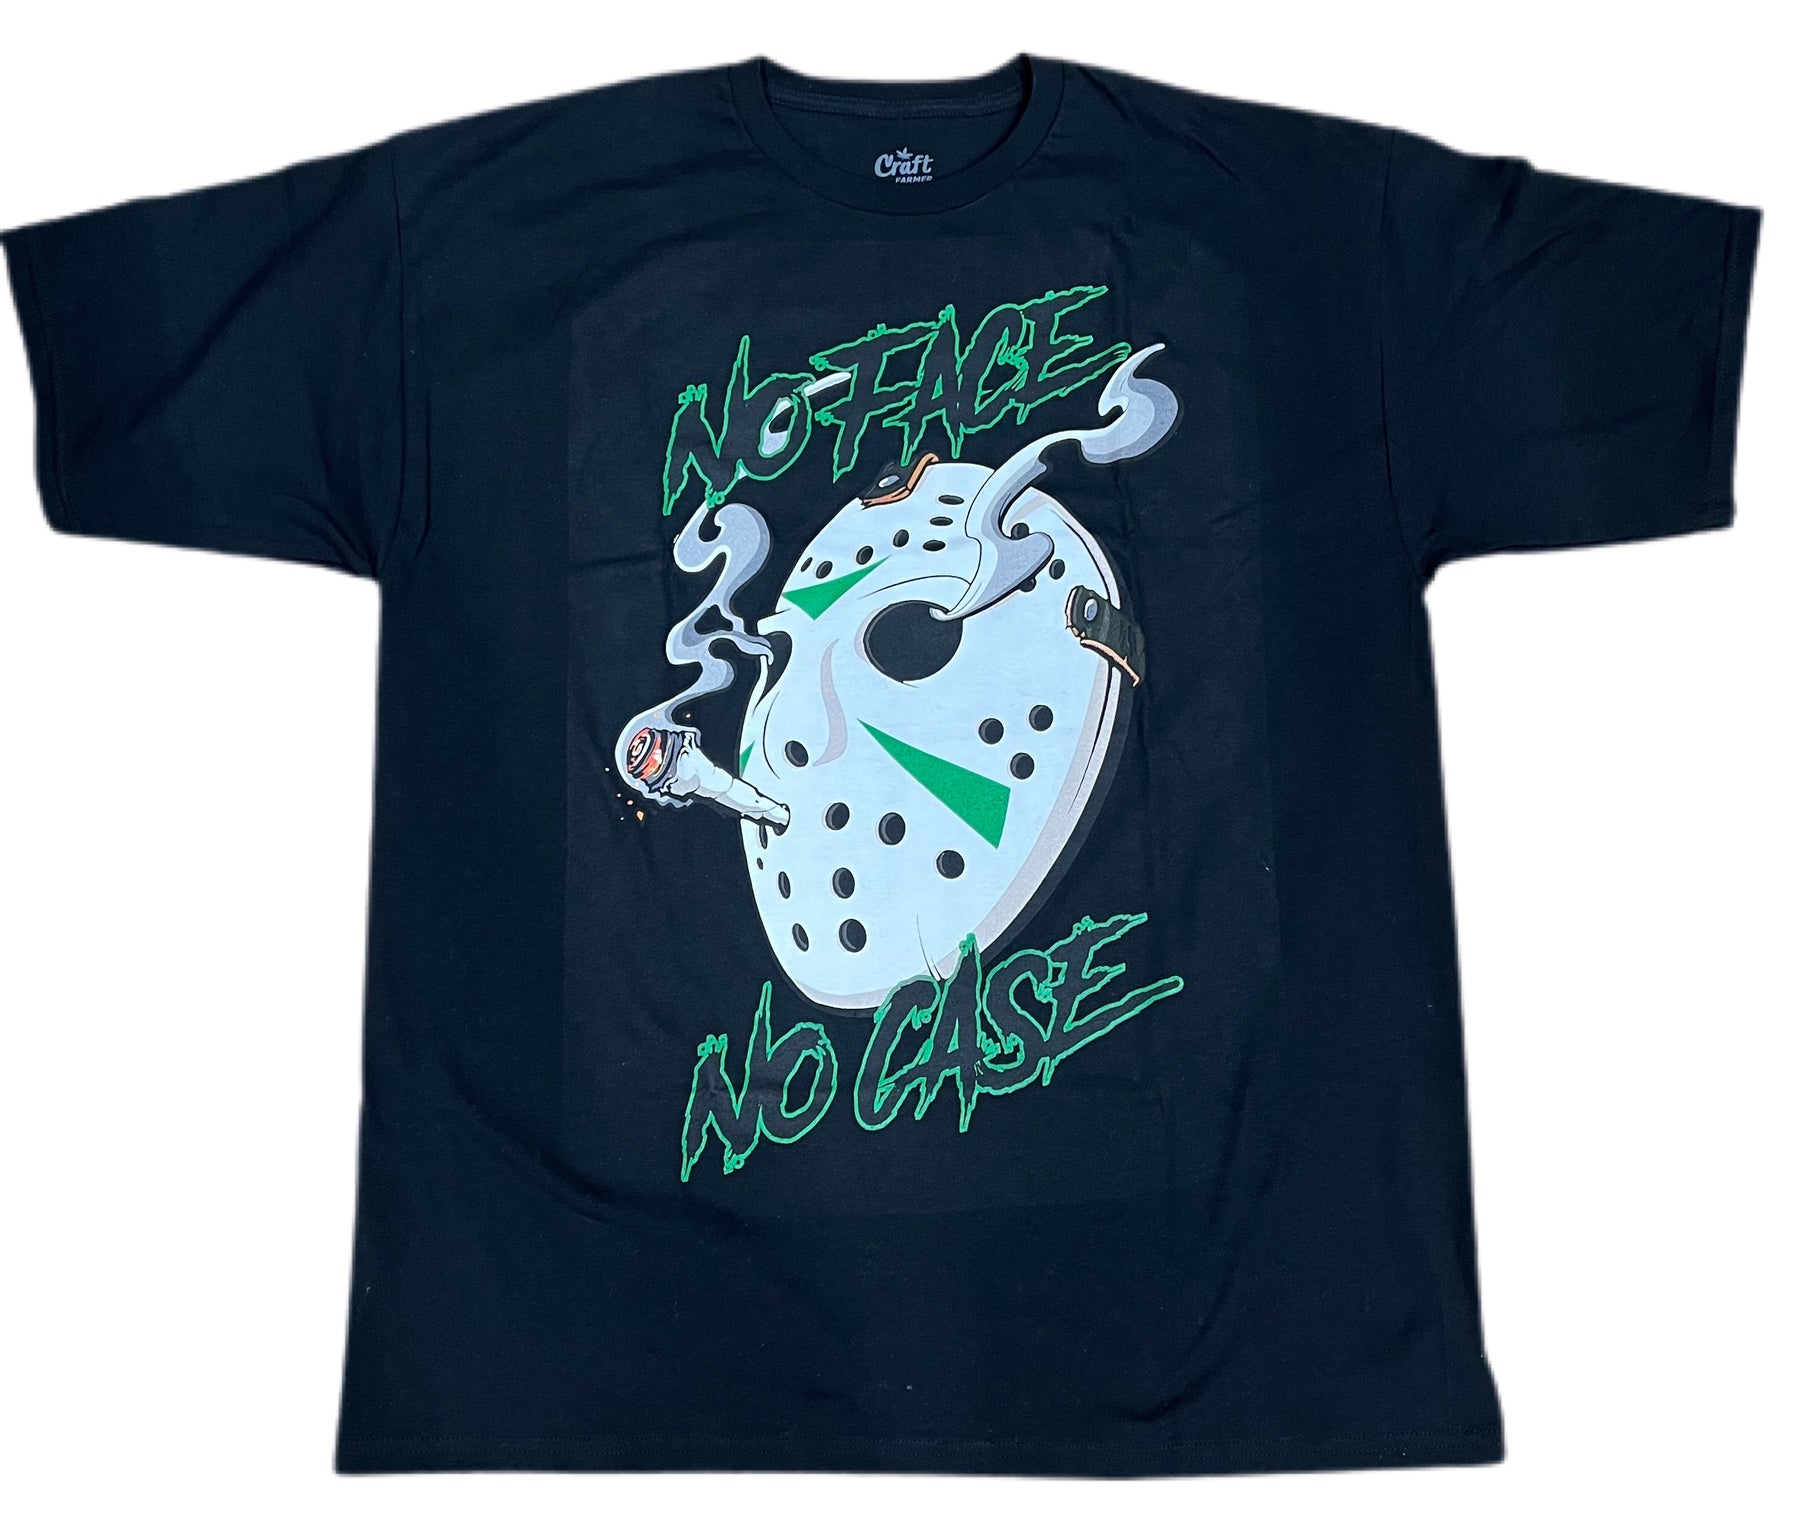 Craft Farmer “No Face” Limited Edition T-Shirt